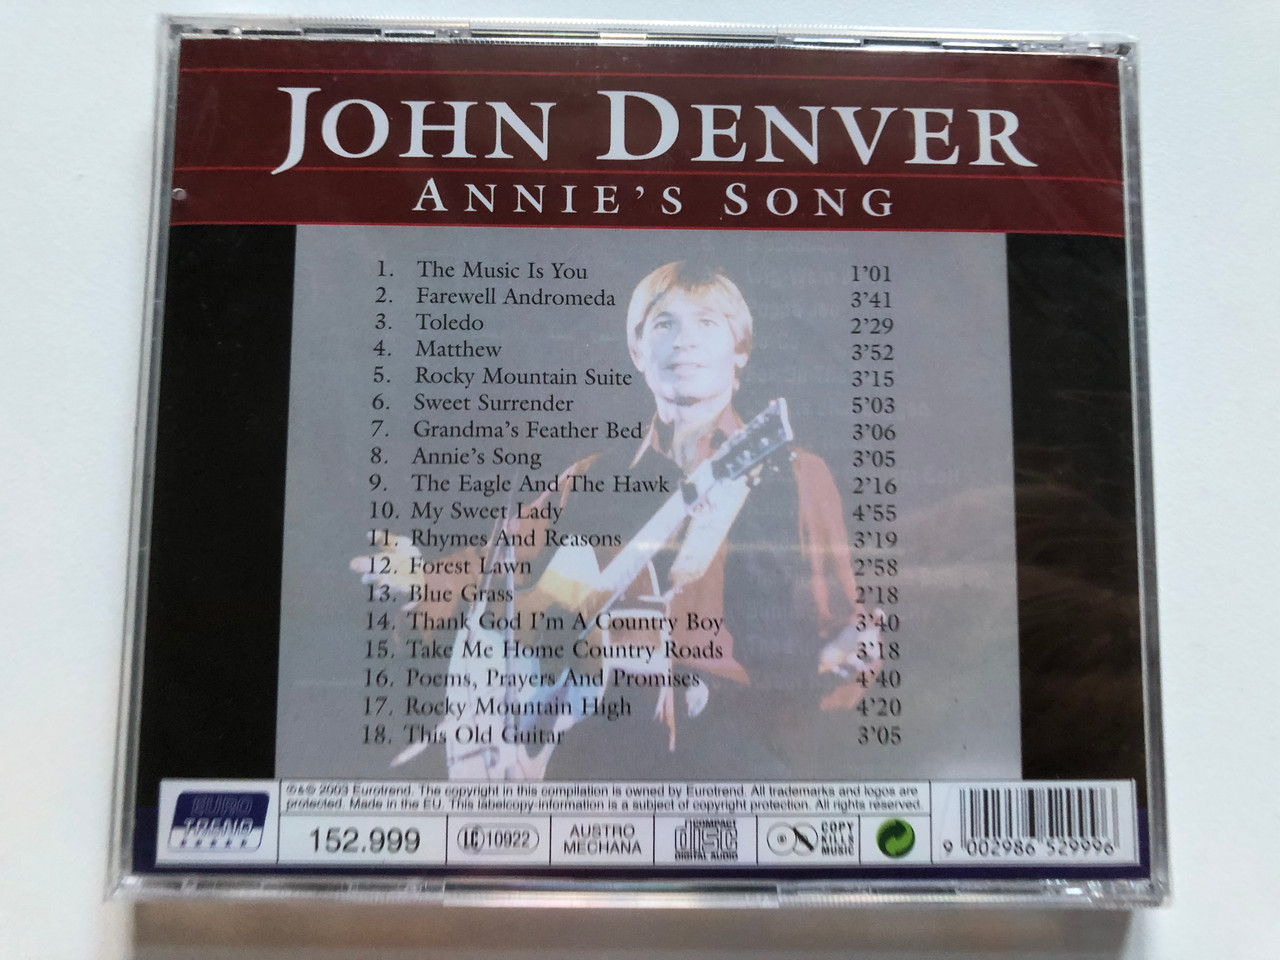 https://cdn10.bigcommerce.com/s-62bdpkt7pb/products/0/images/228263/John_Denver_-_Annies_Song_-_Live_In_Concert_Take_Me_Home_Country_Roads_Thank_God_Im_A_Country_Boy_Rhymes_And_Reasons_Poems_Prayers_and_Promises_a._m._o._Eurotrend_Audio_CD_2003_15__14994.1653065585.1280.1280.JPG?c=2&_gl=1*4isay3*_ga*MjA2NTIxMjE2MC4xNTkwNTEyNTMy*_ga_WS2VZYPC6G*MTY1MzA1NDg0MC40MDUuMS4xNjUzMDY1MzcyLjMw